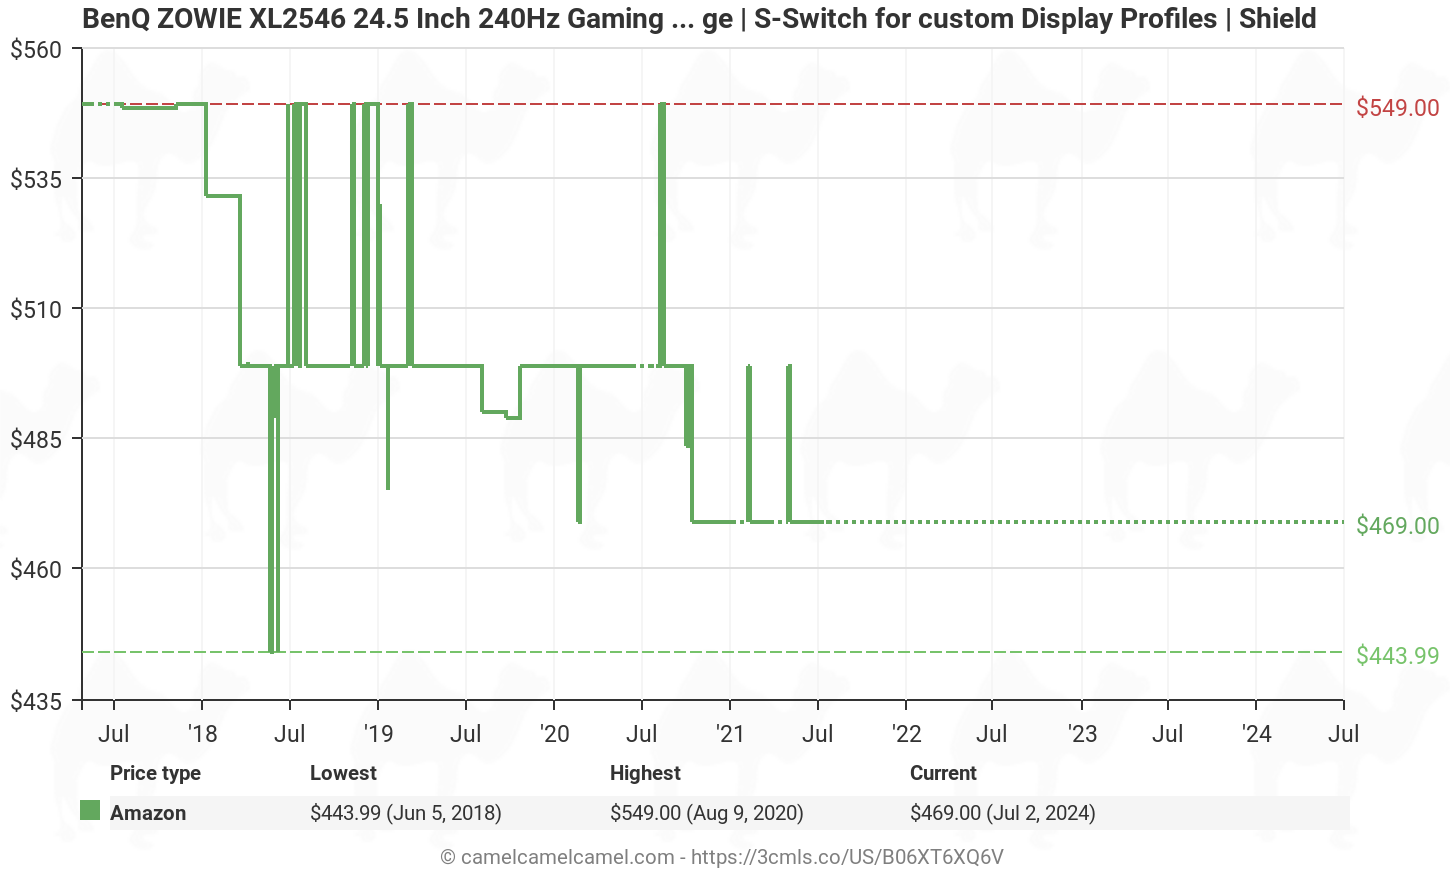 Benq Zowie Xl2546 24 5 Inch 240hz Gaming Monitor 1080p 1ms Dynamic Accuracy Black Equalizer For Competitive Edge S Switch For Custom Display Profiles Shield B06xt6xq6v Amazon Price